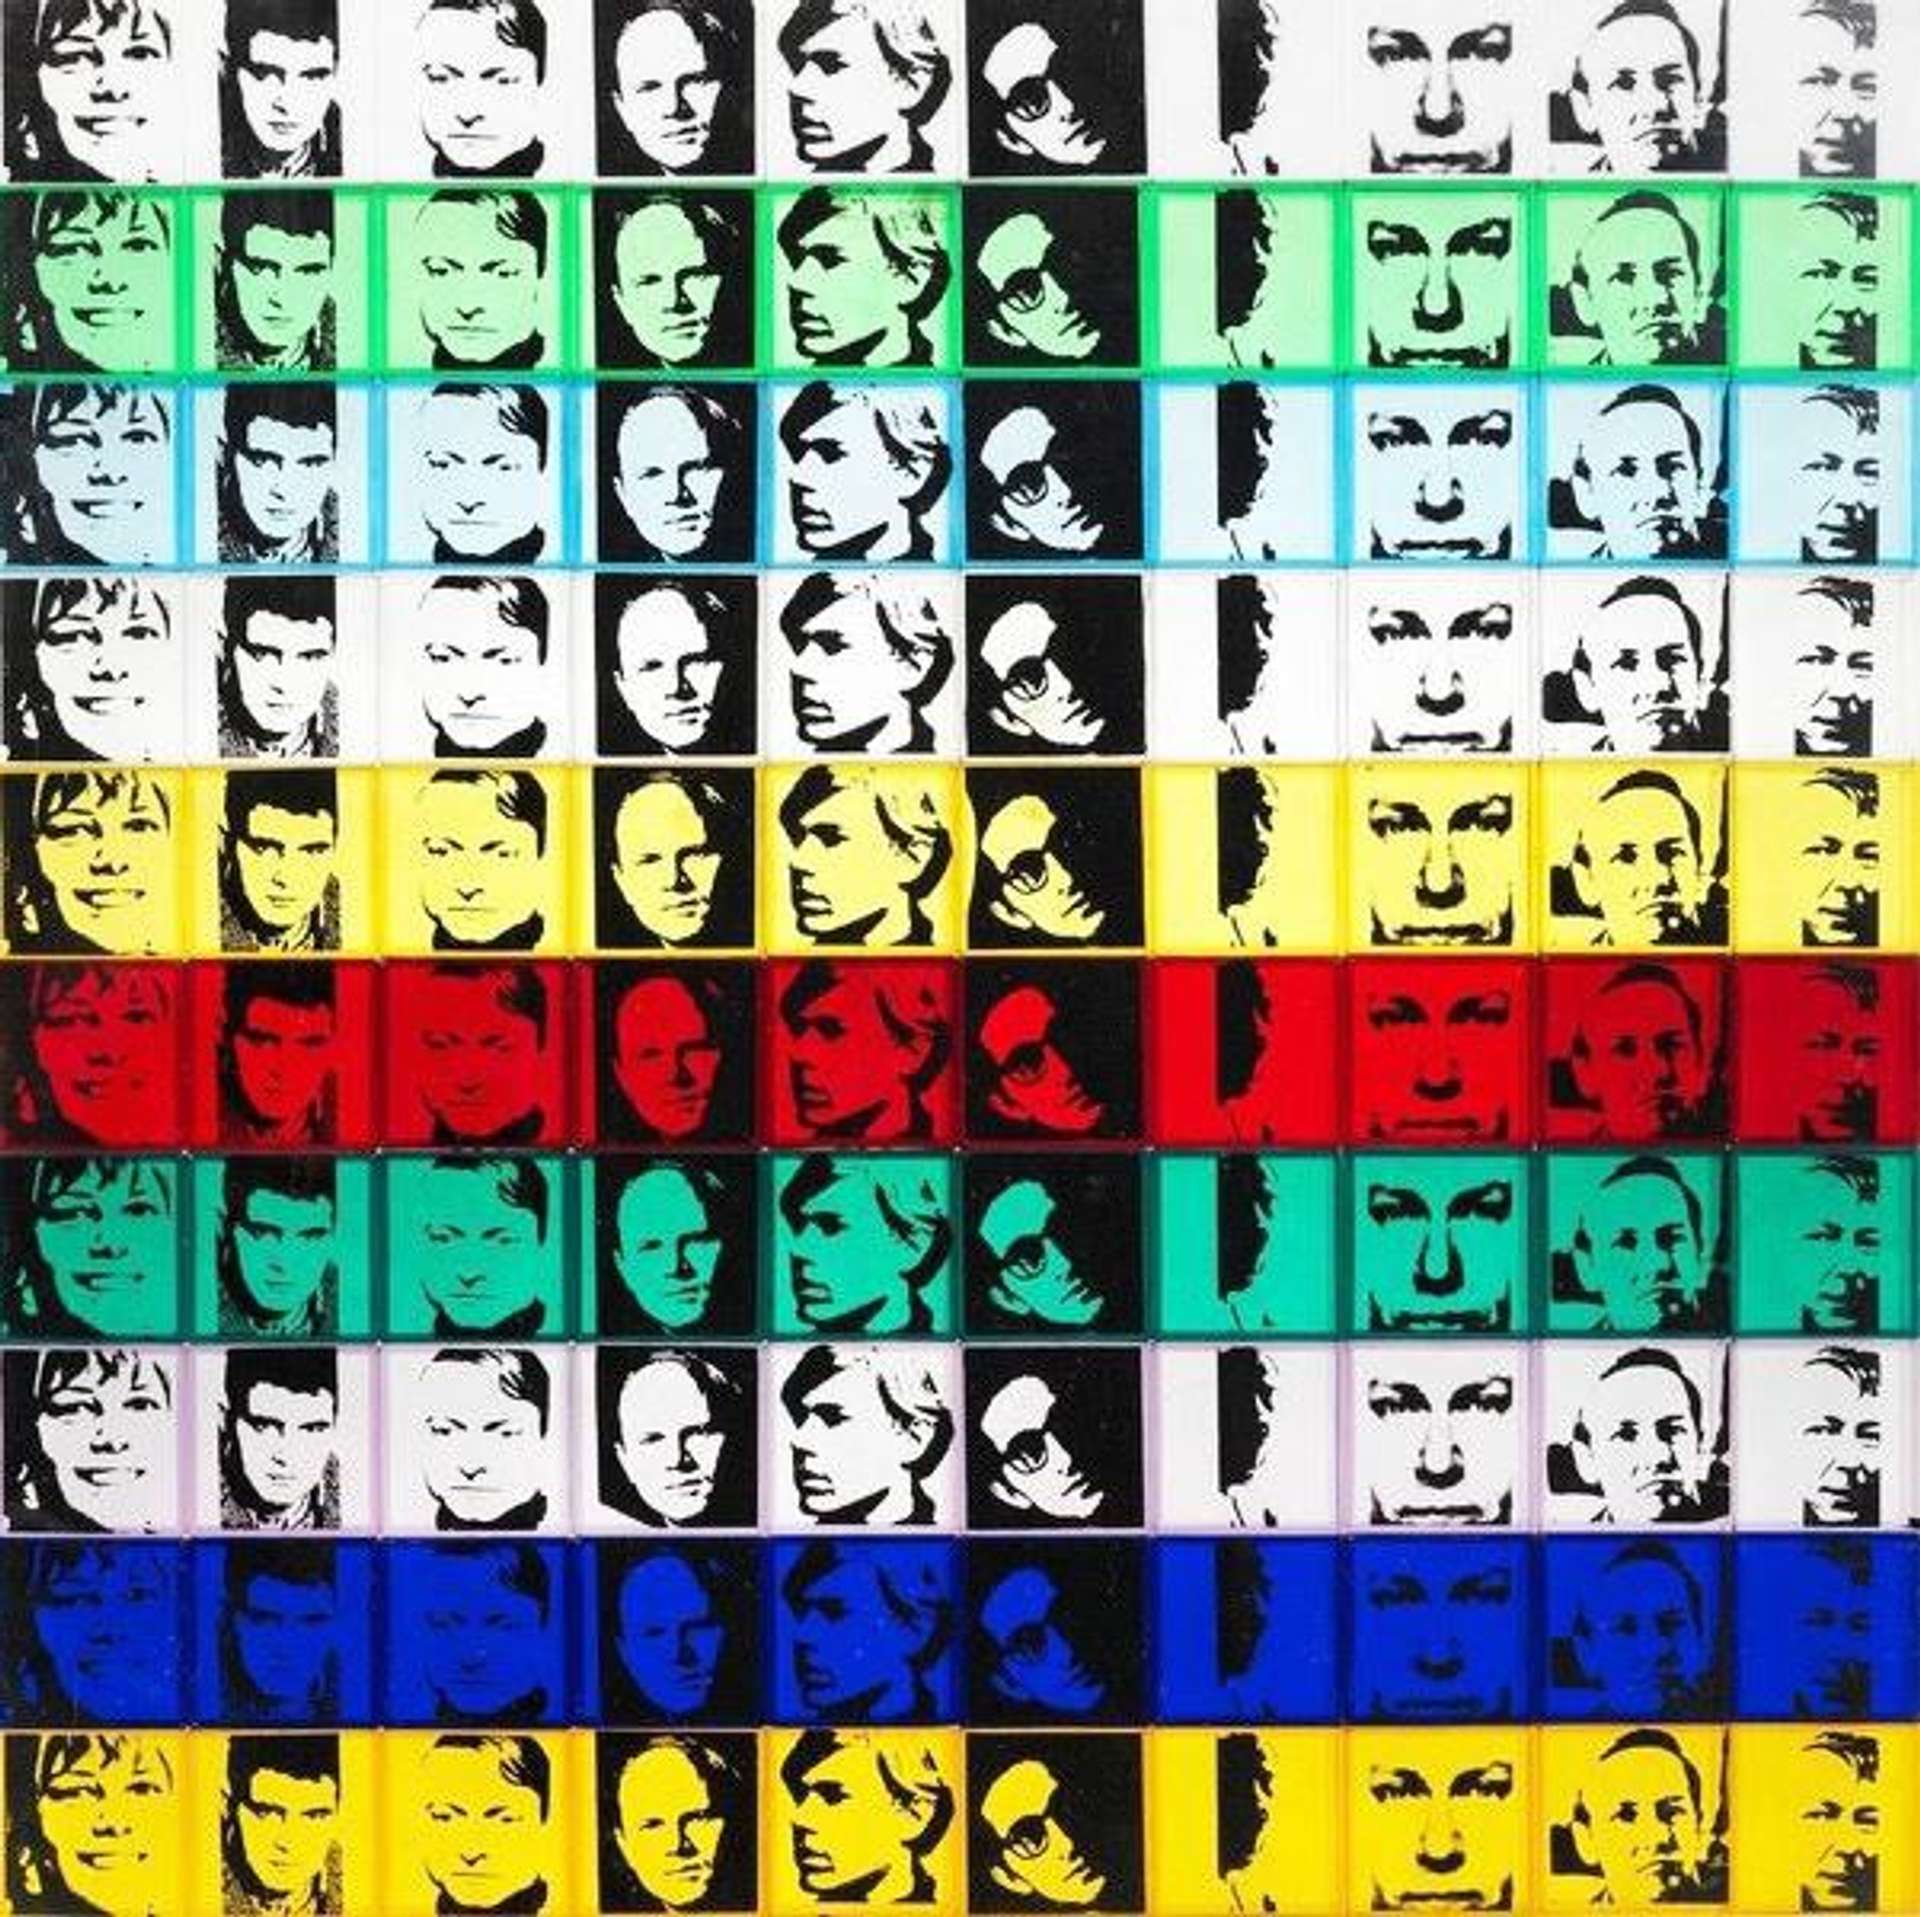 In this print Warhol depicts the portraits of himself alongside Robert Morris, Jasper Johns, Roy Lichtenstein, Larry Poons, James Rosenquist, Frank Stella, Lee Bontecou, Donald Juddand Robert Rauschenberg. In his trademark repetitive style, Warhol has multiplied the portraits of each artist by ten.